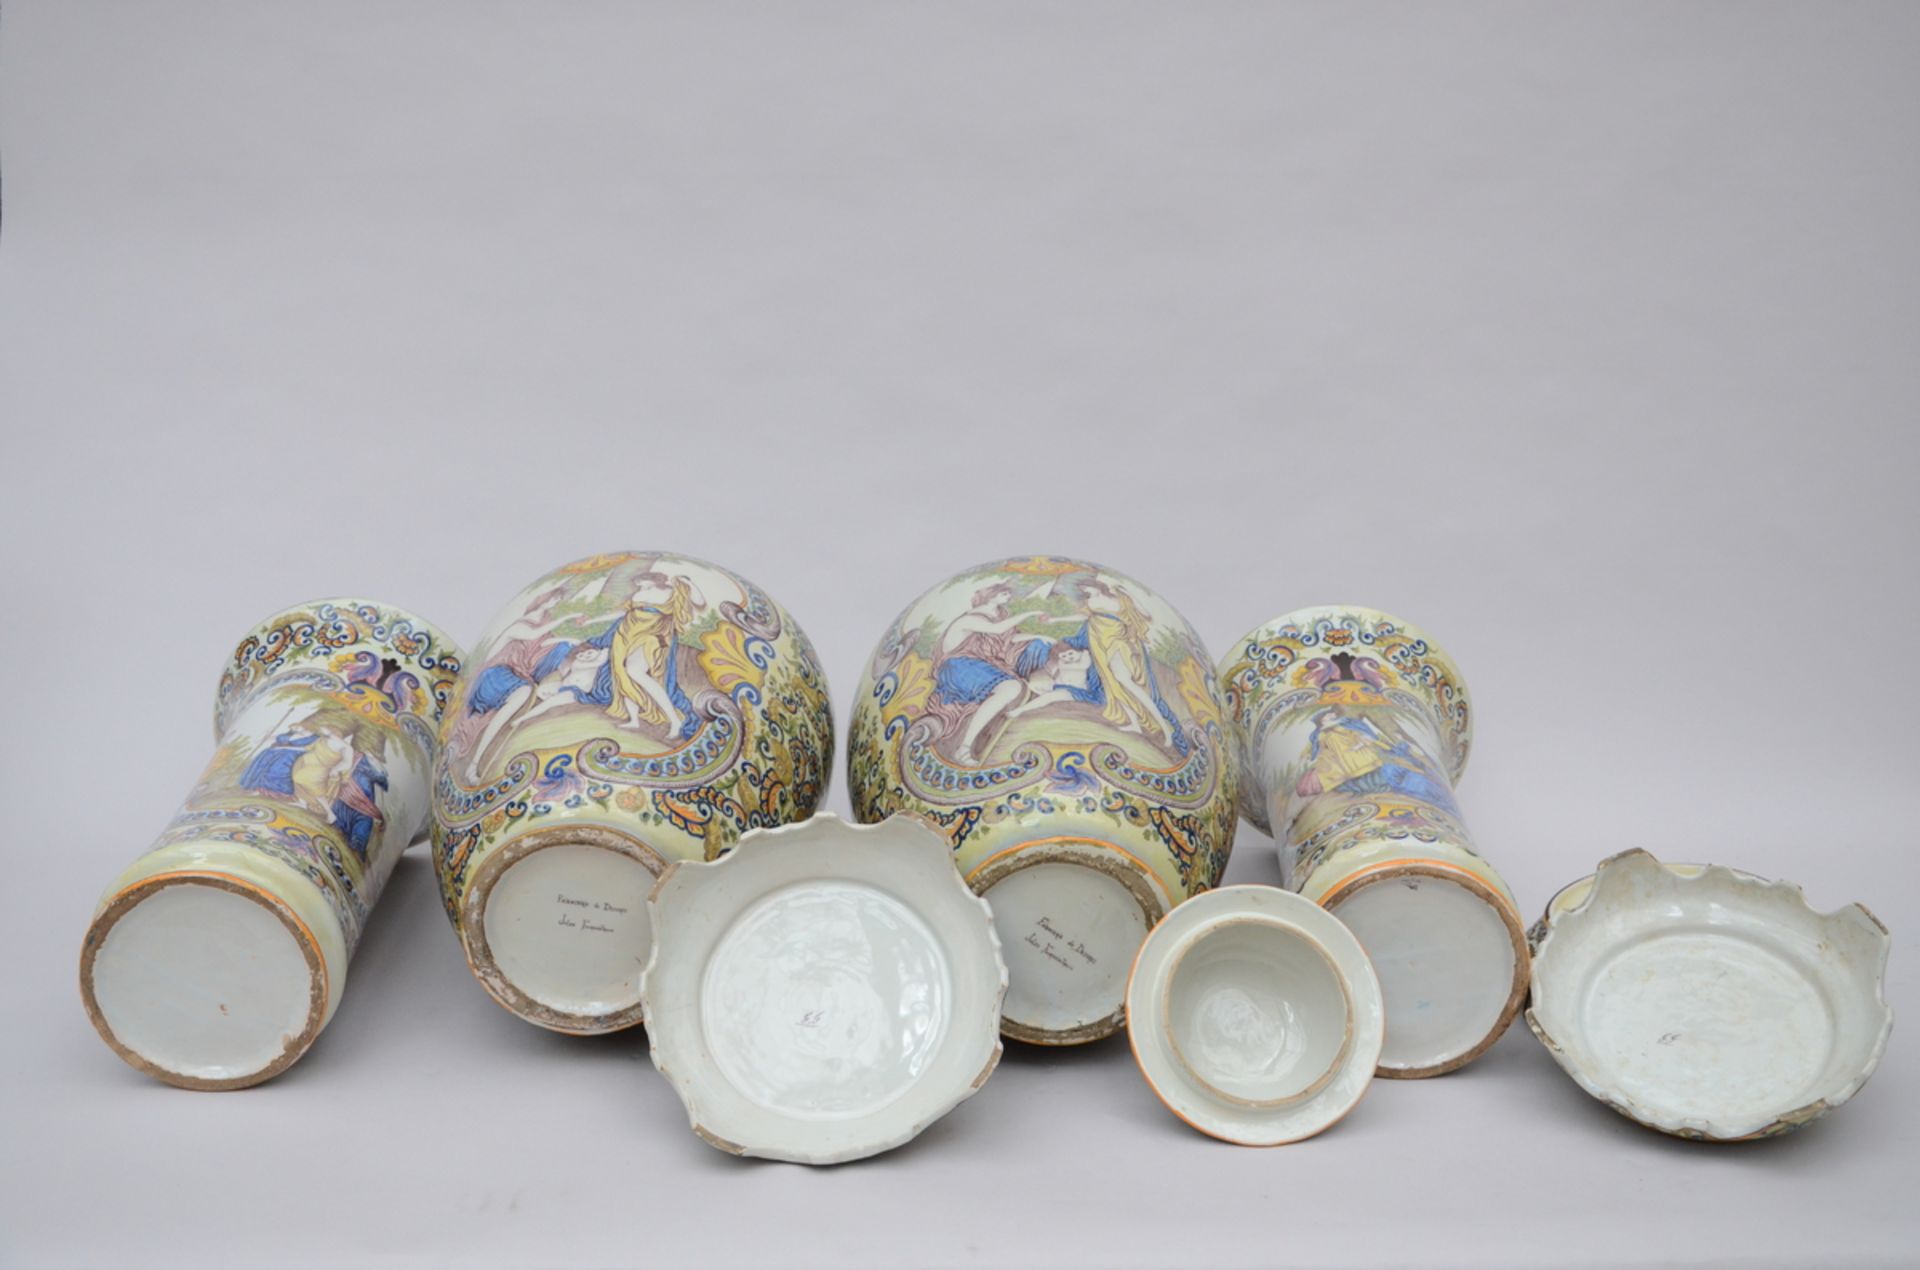 Large four-piece set in Desvres faience by Jules Fourmaintraux (73cm and 60cm) (*) - Image 6 of 7